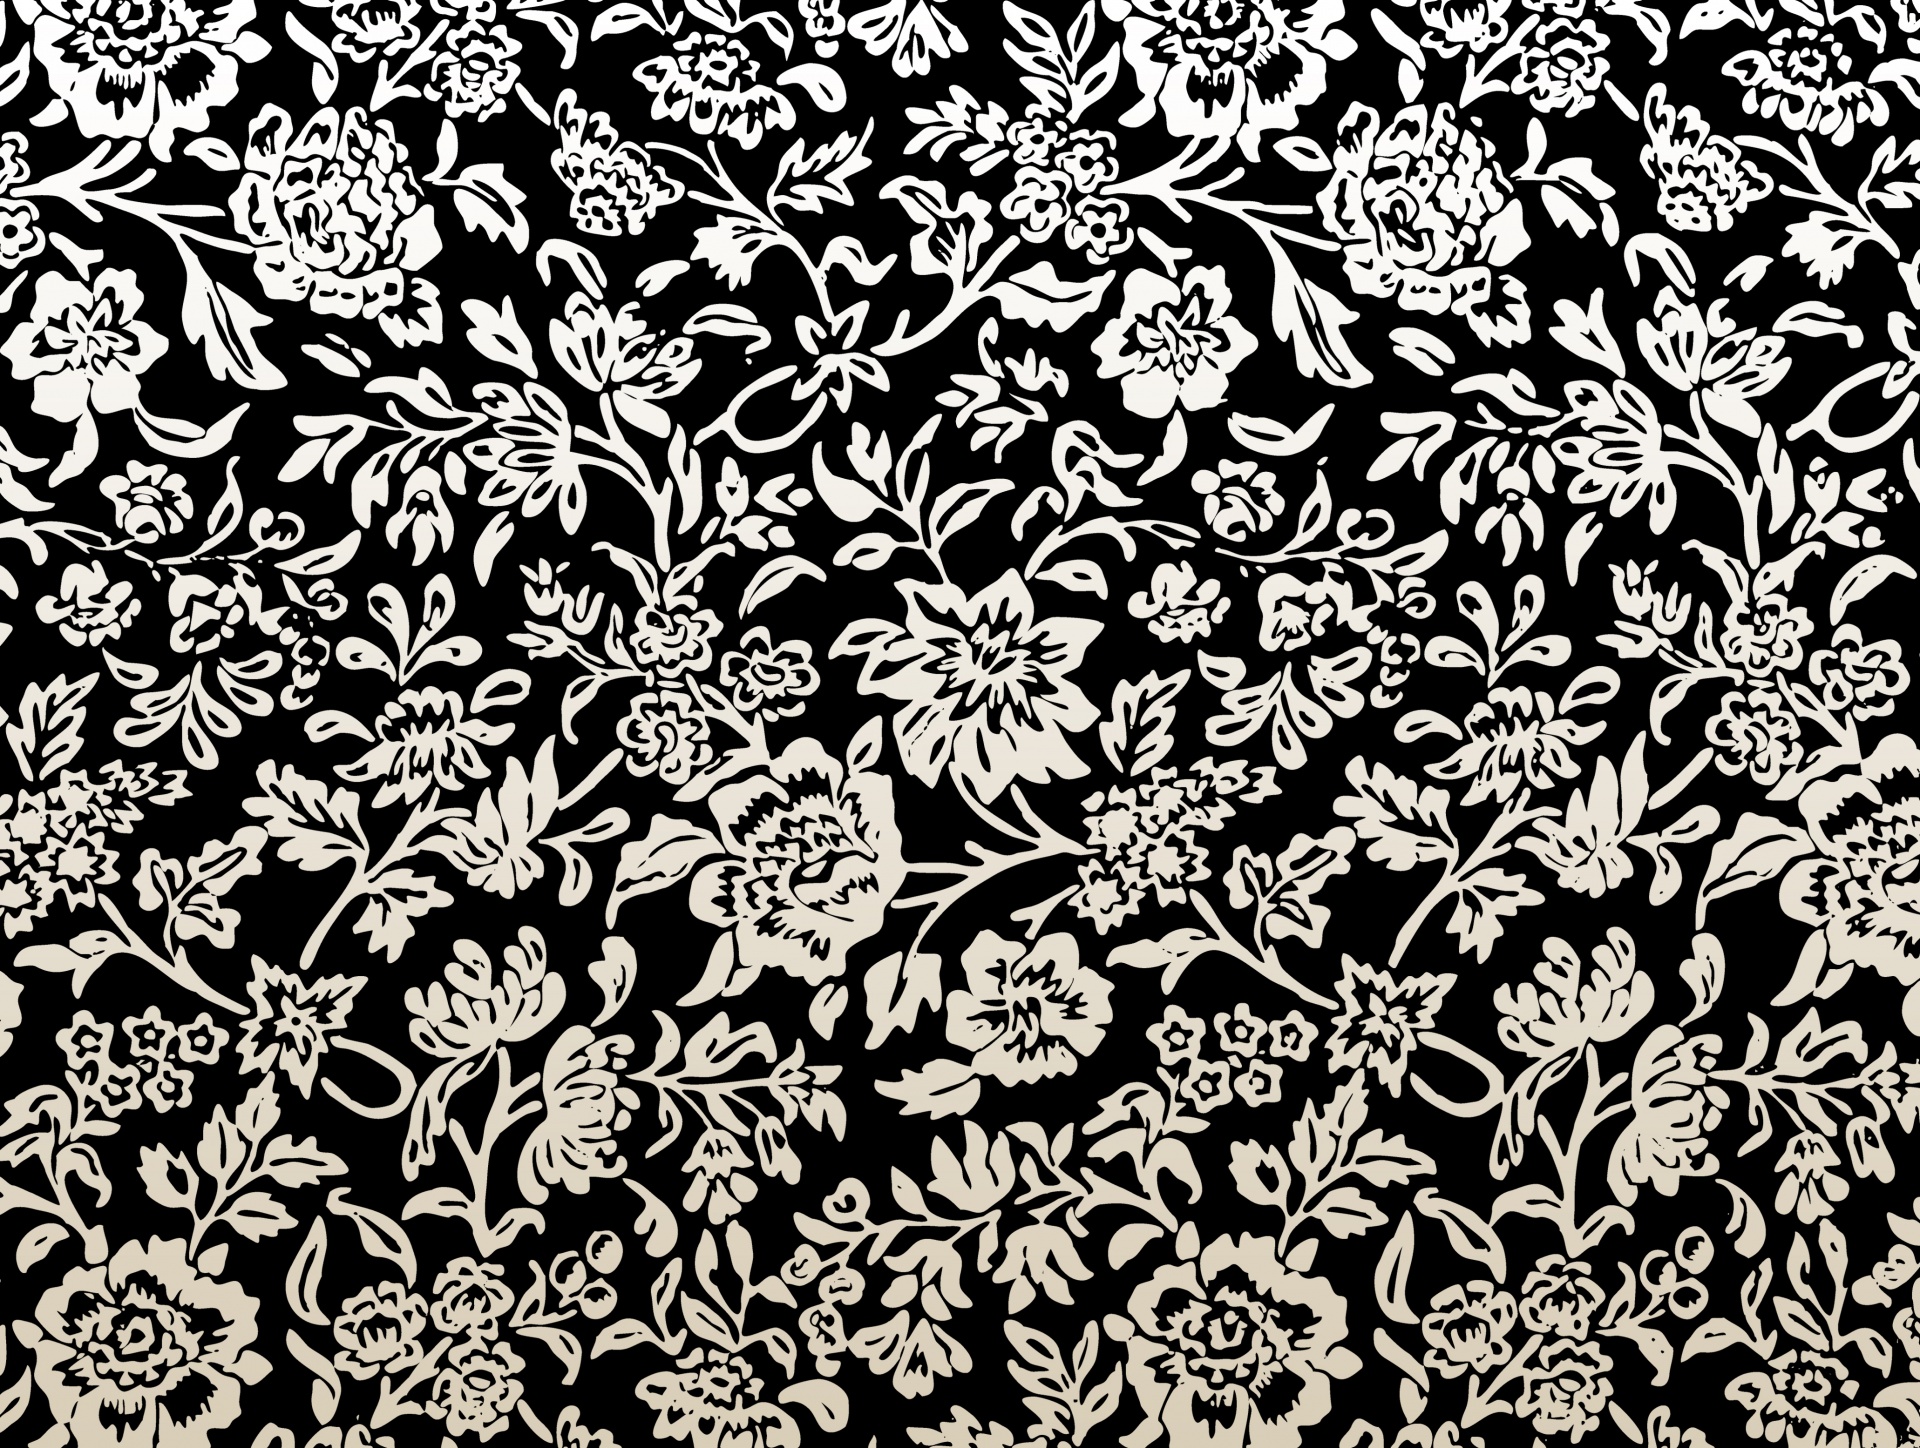 Floral Background Black Free Photo - Floral Background Black And White -  1920x1448 Wallpaper 